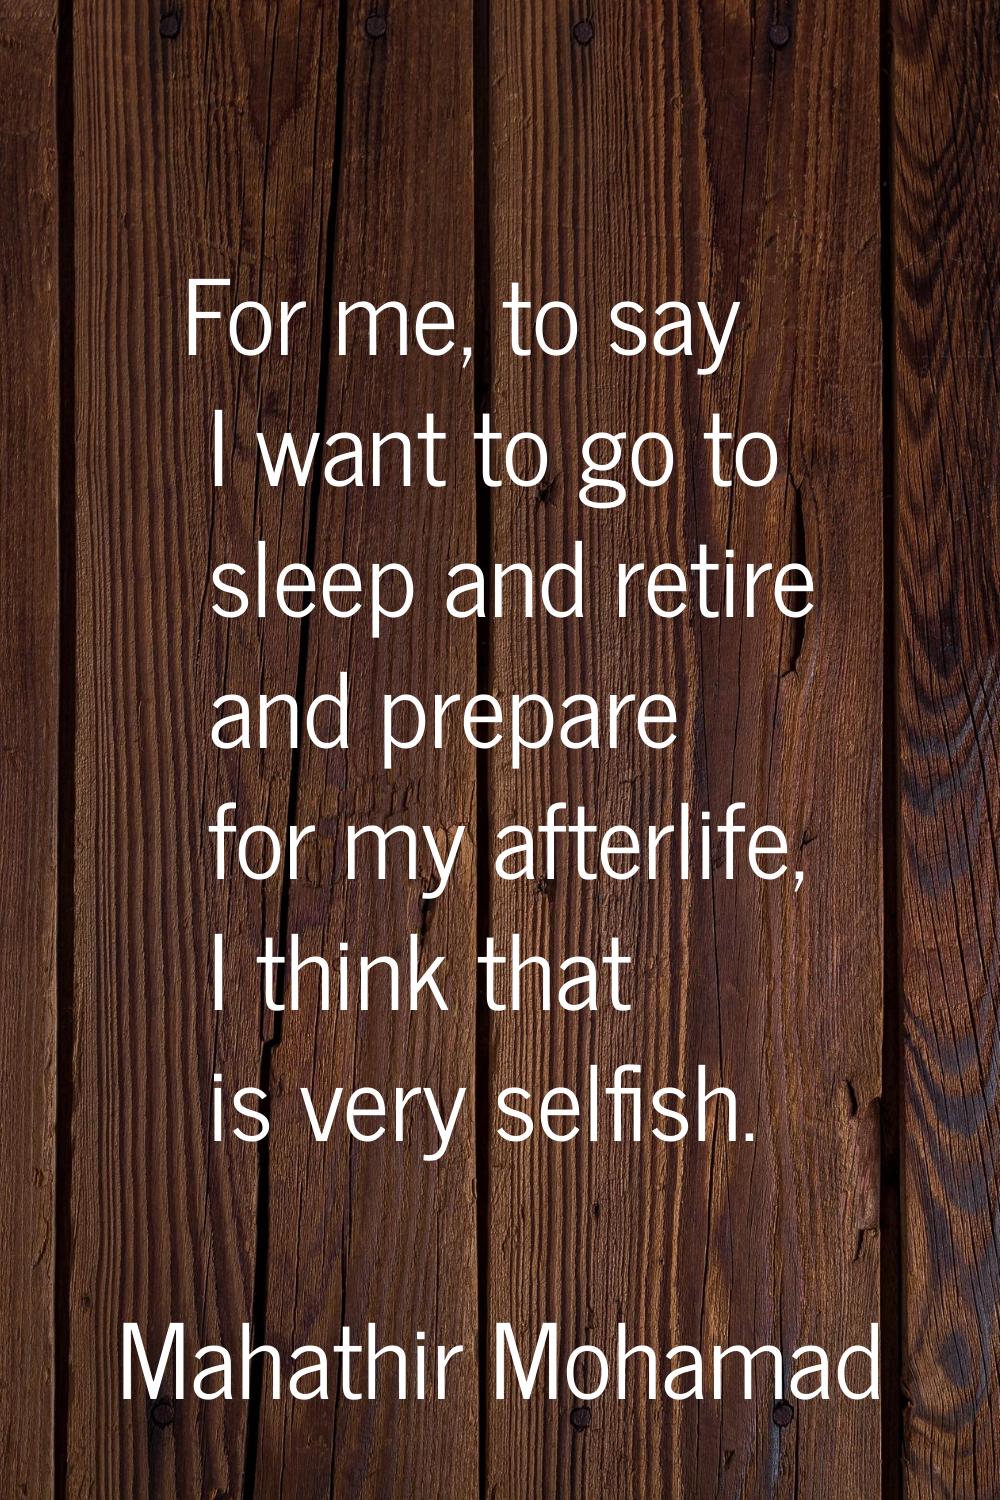 For me, to say I want to go to sleep and retire and prepare for my afterlife, I think that is very 